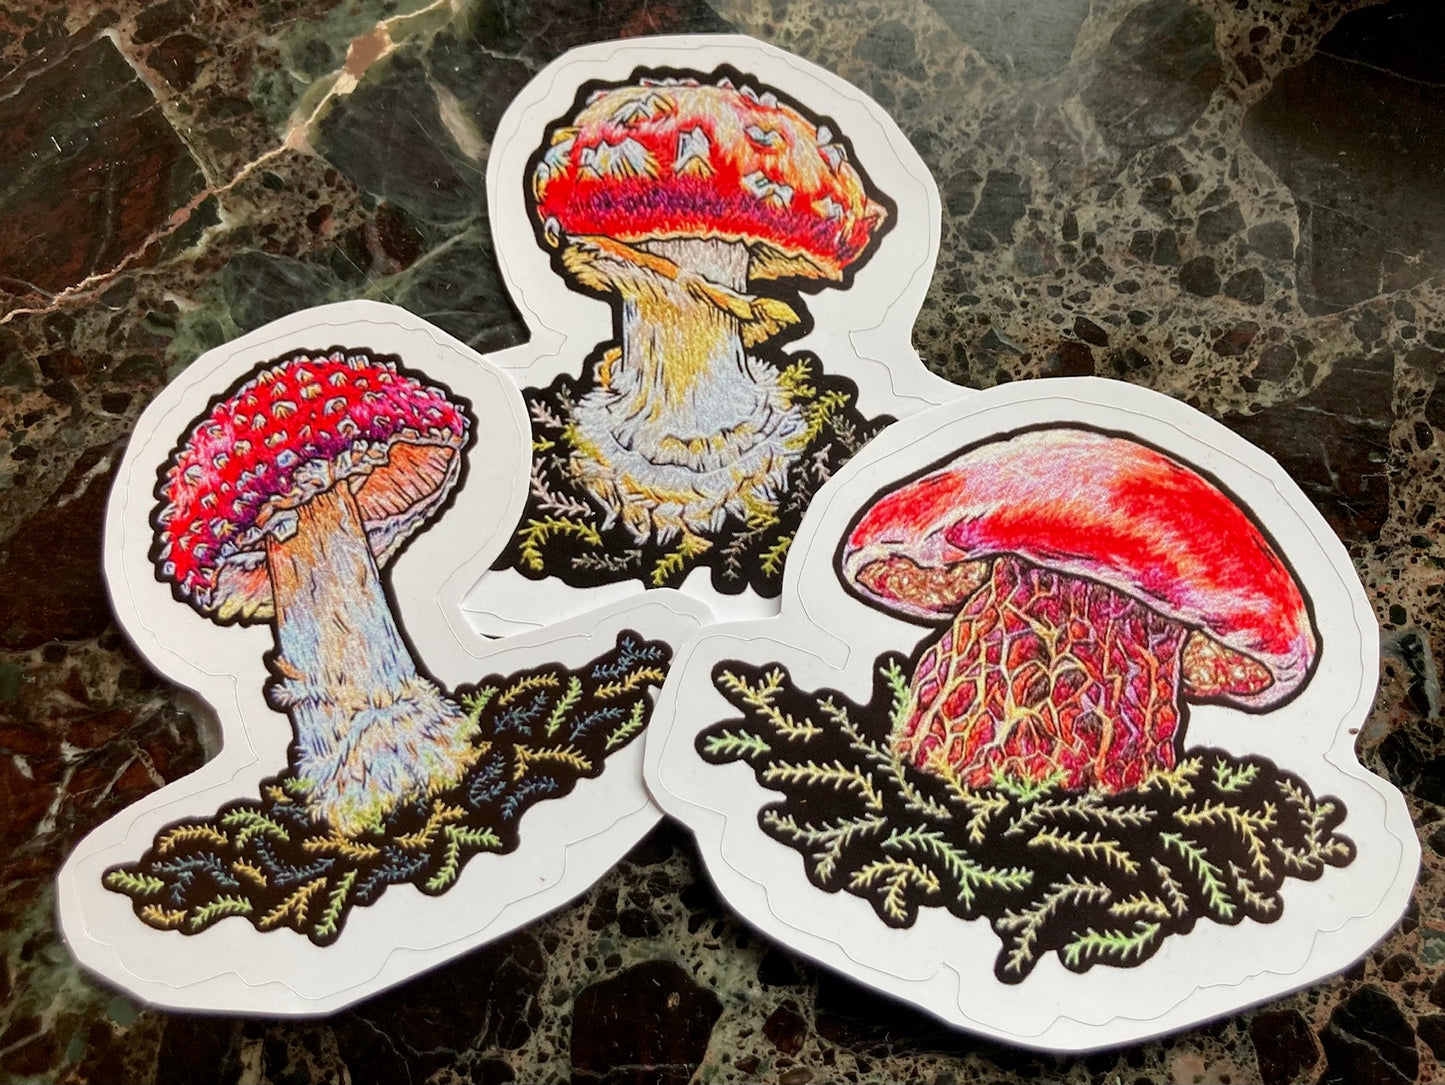 Mushroom Sticker Collection (3 large stickers)